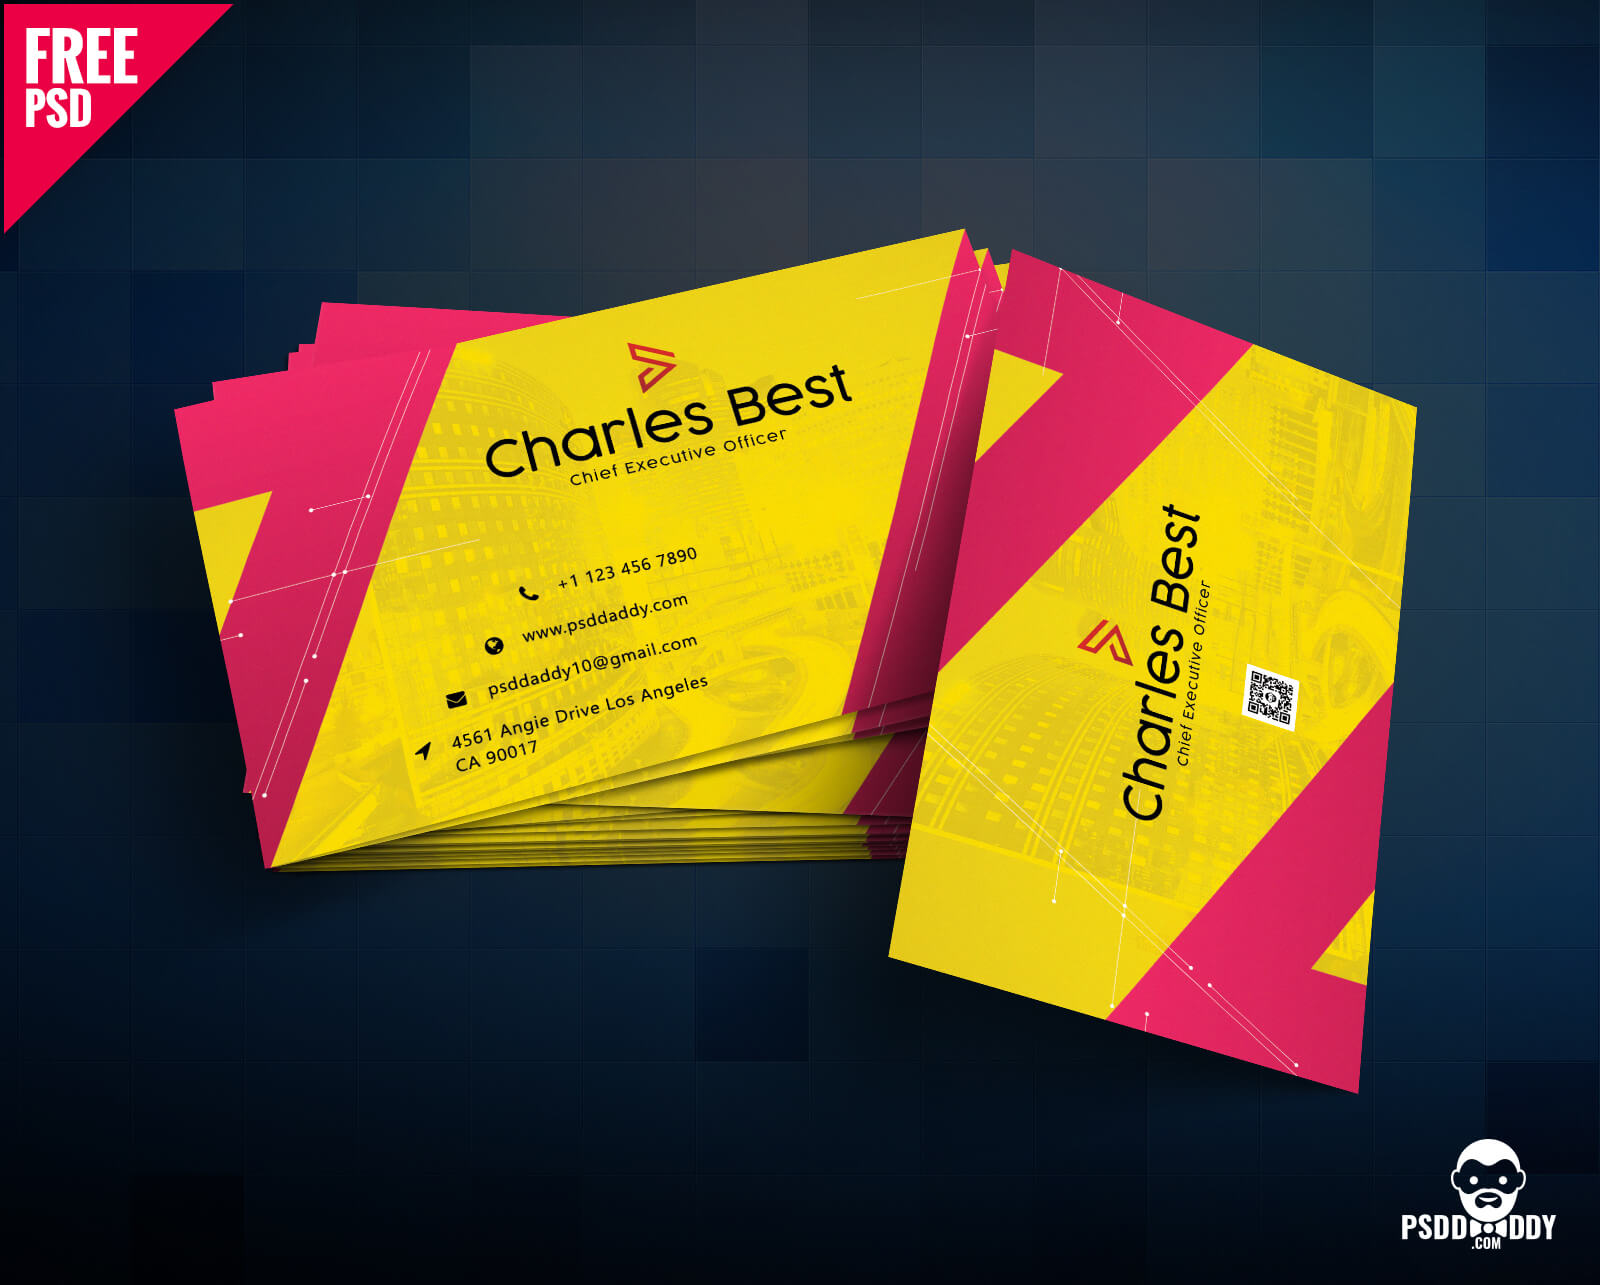 Download] Creative Business Card Free Psd | Psddaddy Regarding Business Card Size Template Photoshop